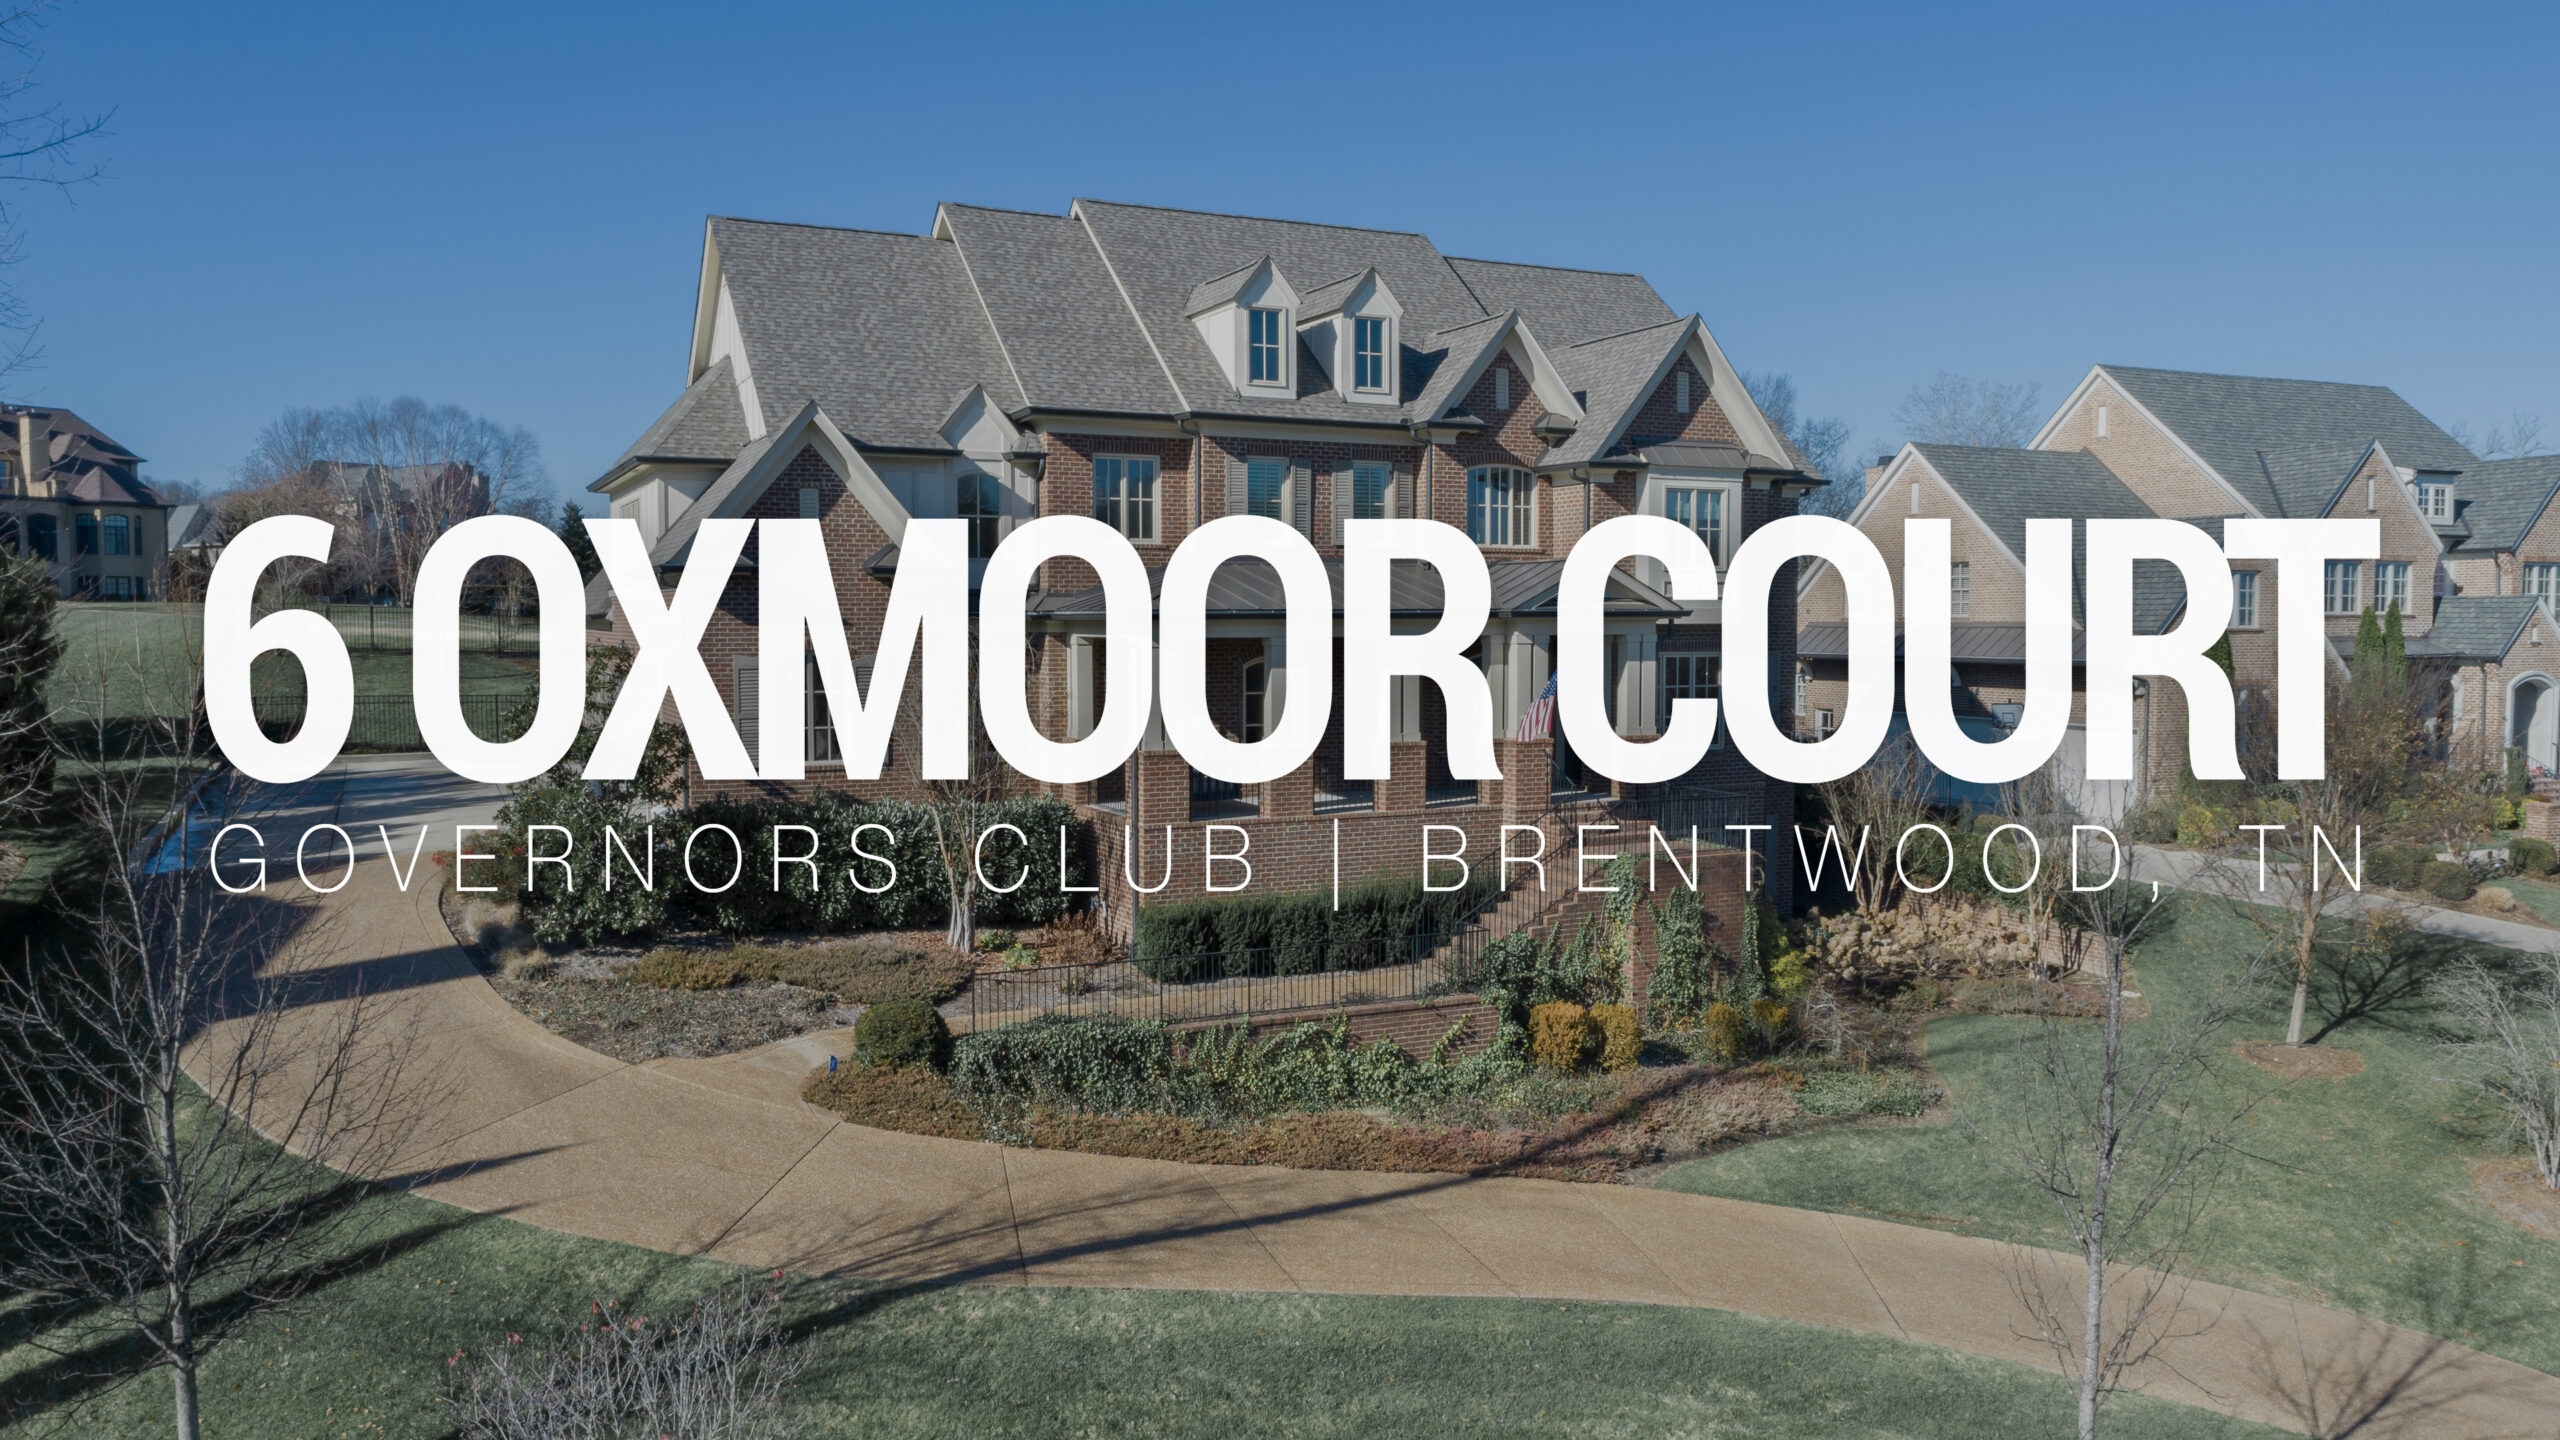 6 Oxmoor Court Brentwood, TN • Governors Club